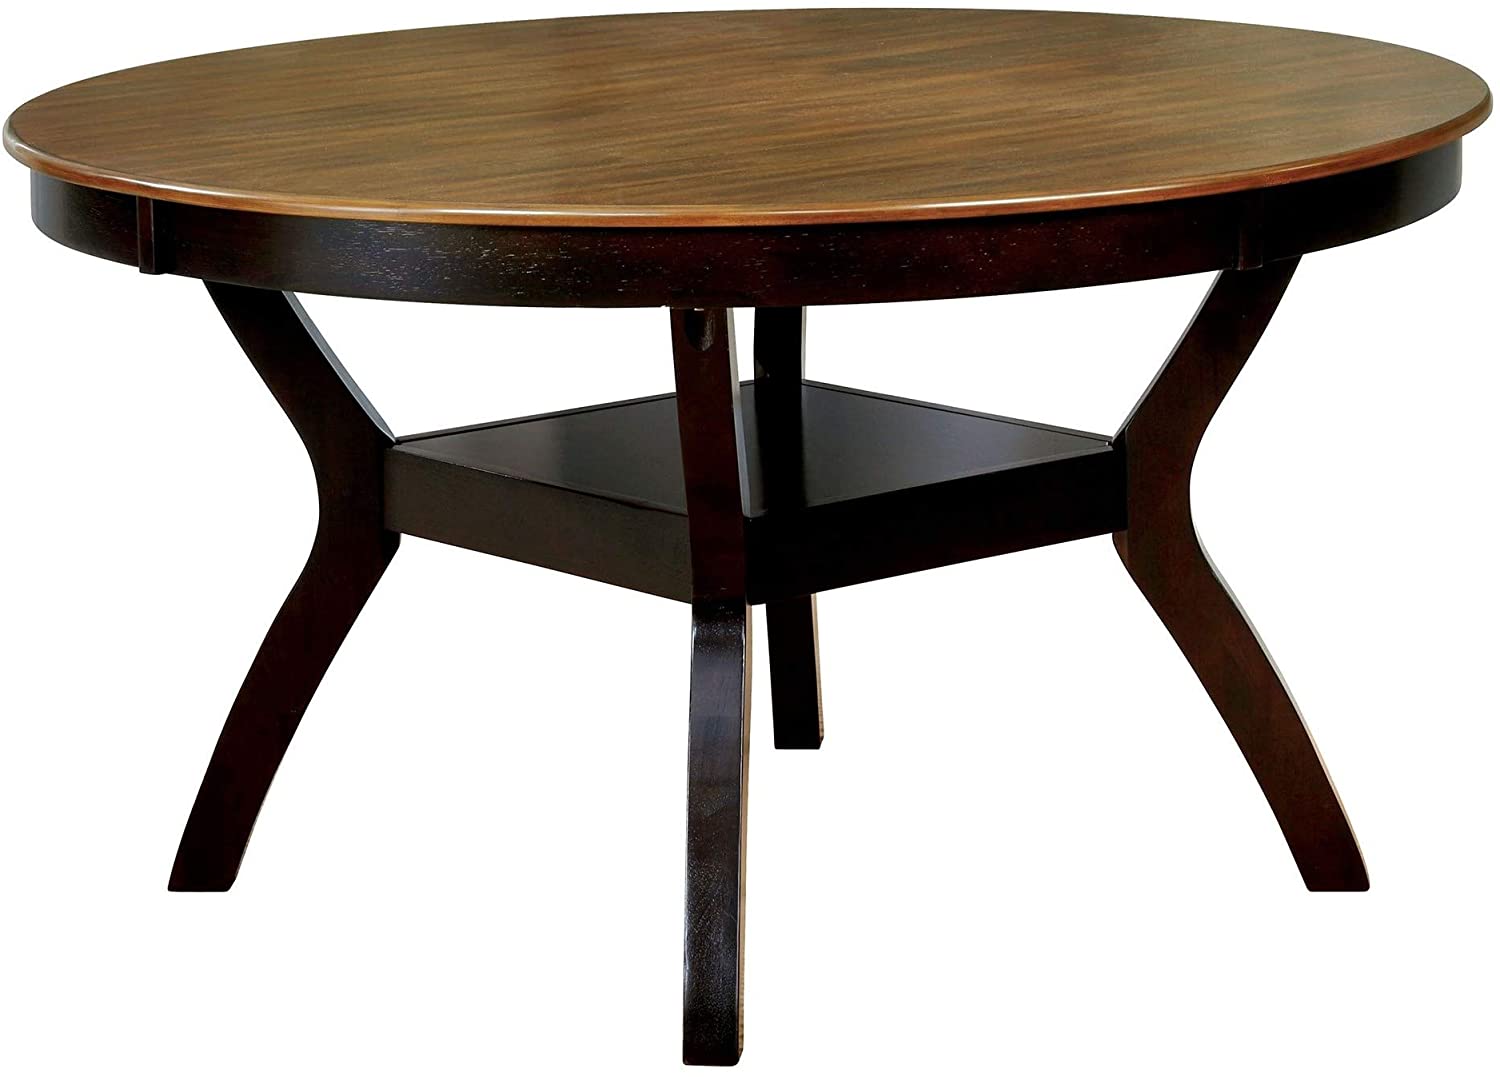 B08DSYZ9G1 Benjara 54 Inch Two Tone Round Dining Table with Angled Legs, Brown